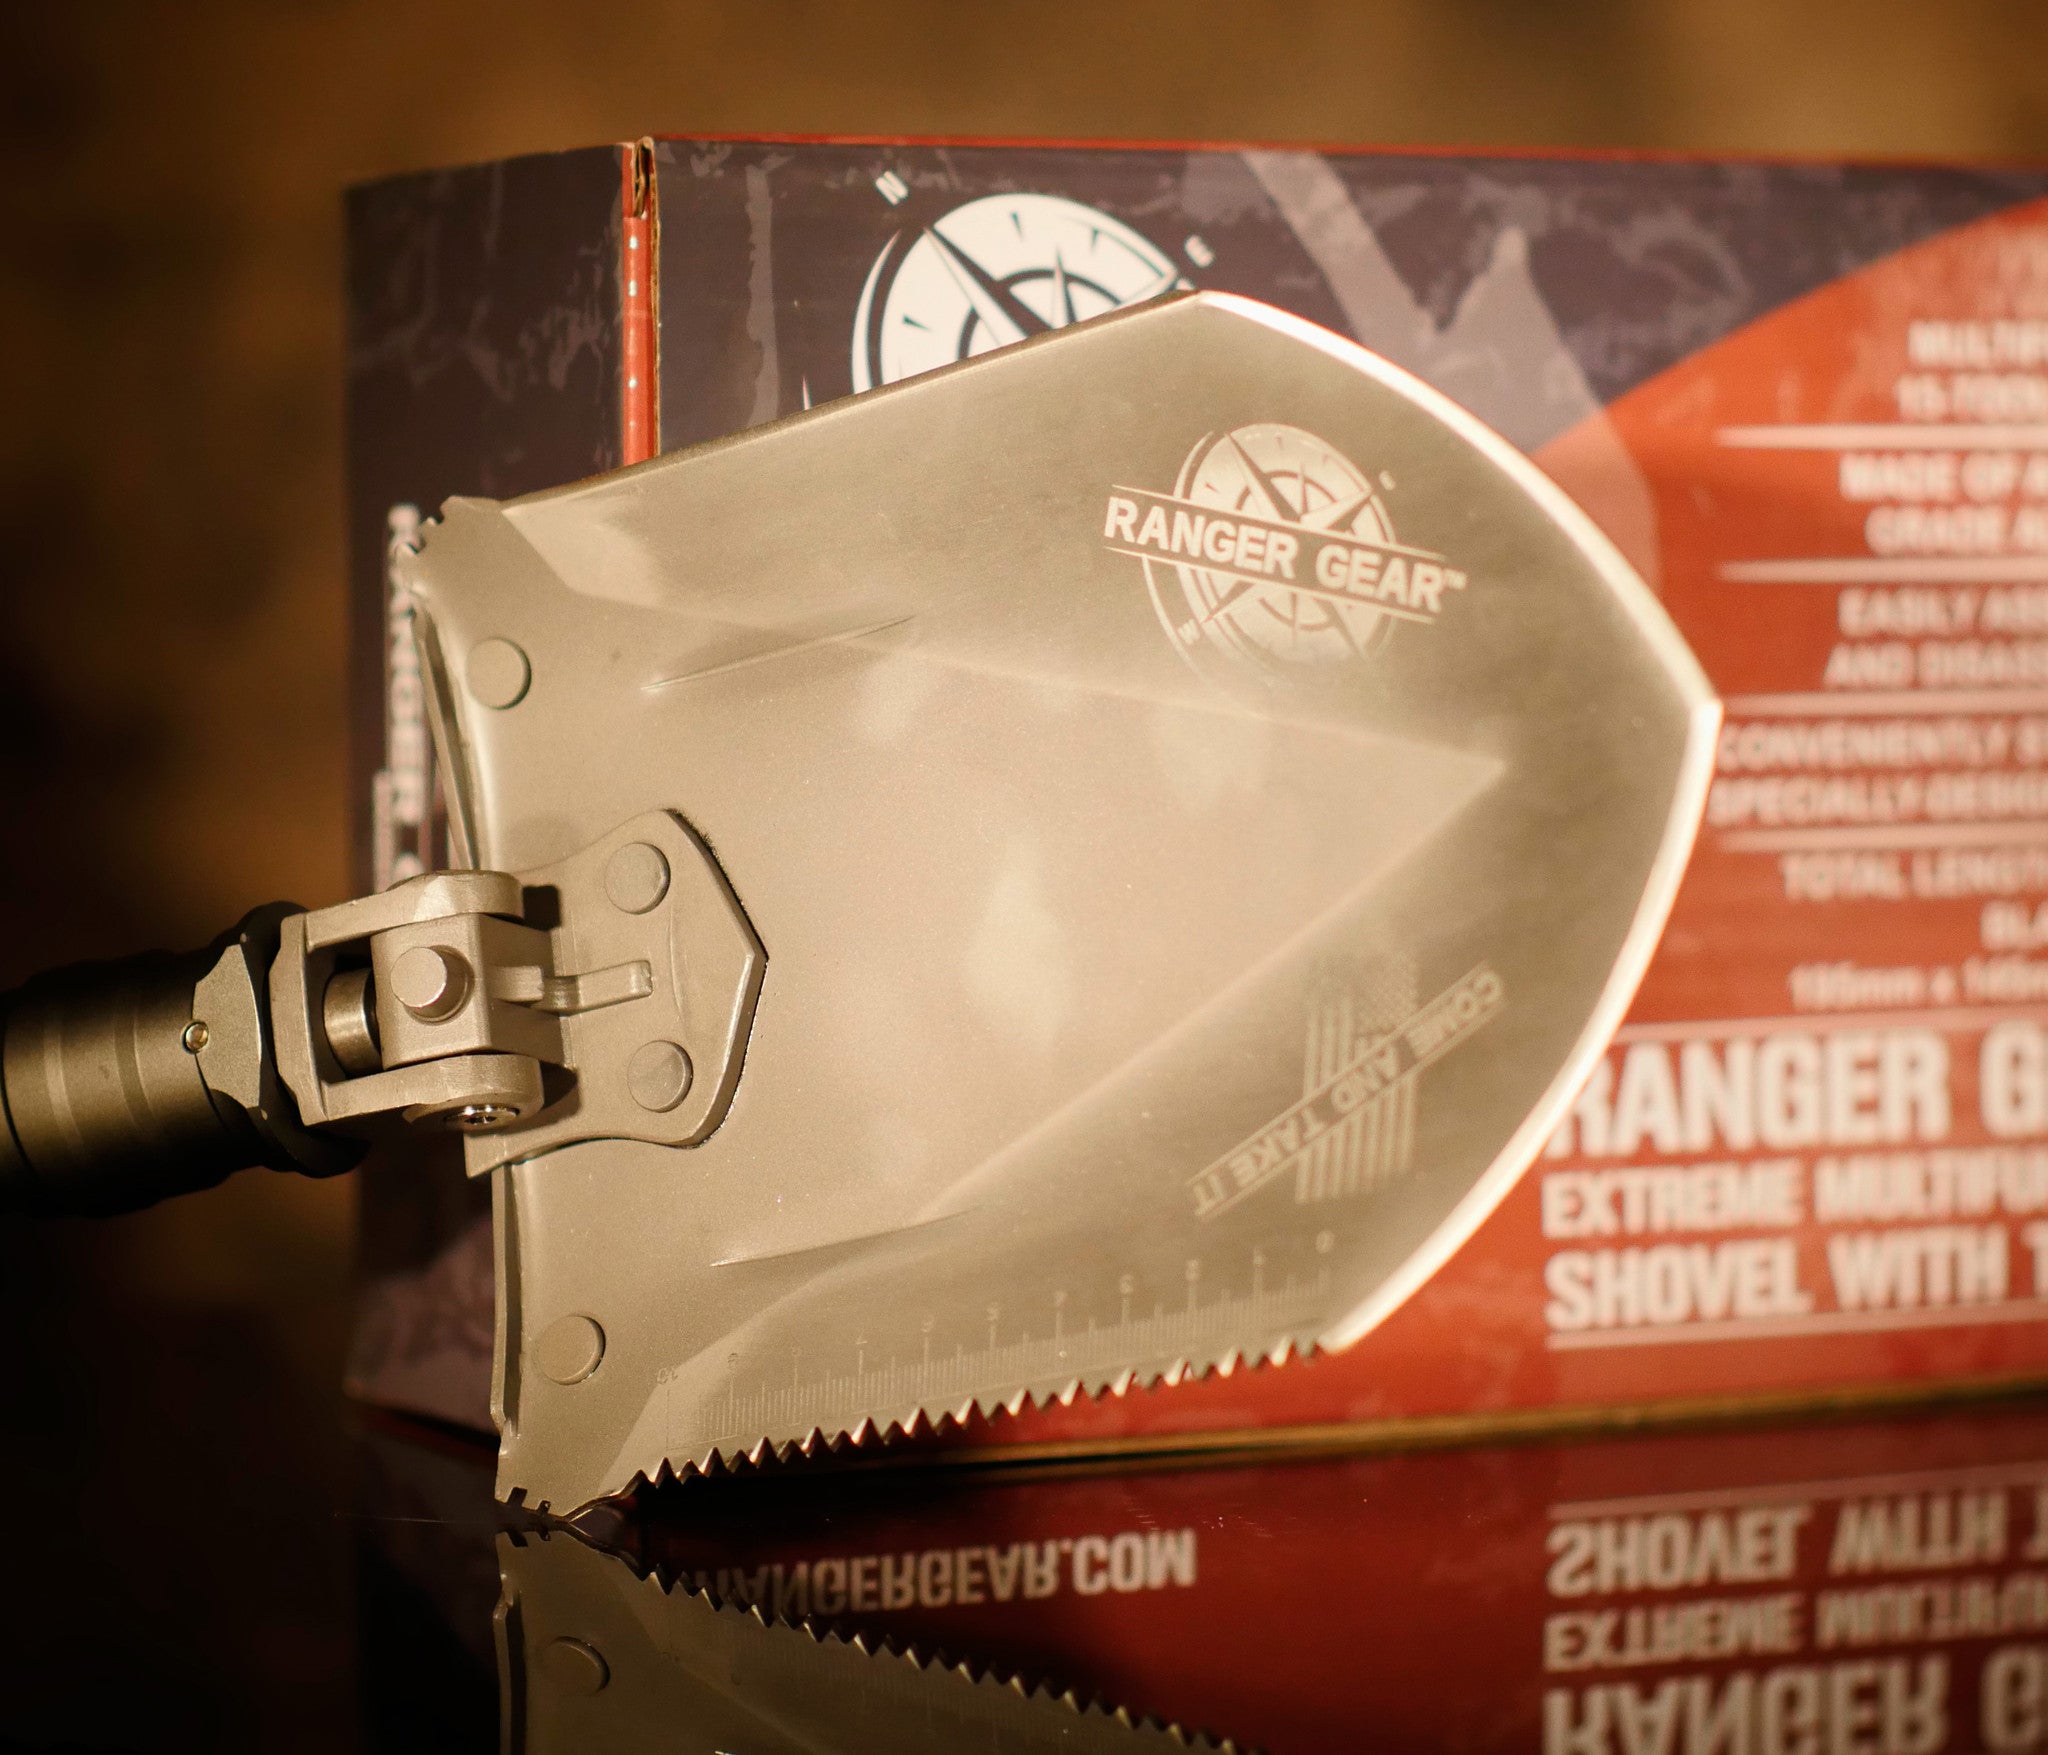 See my amazing Ranger Gear survival shovel in action: VIDEO